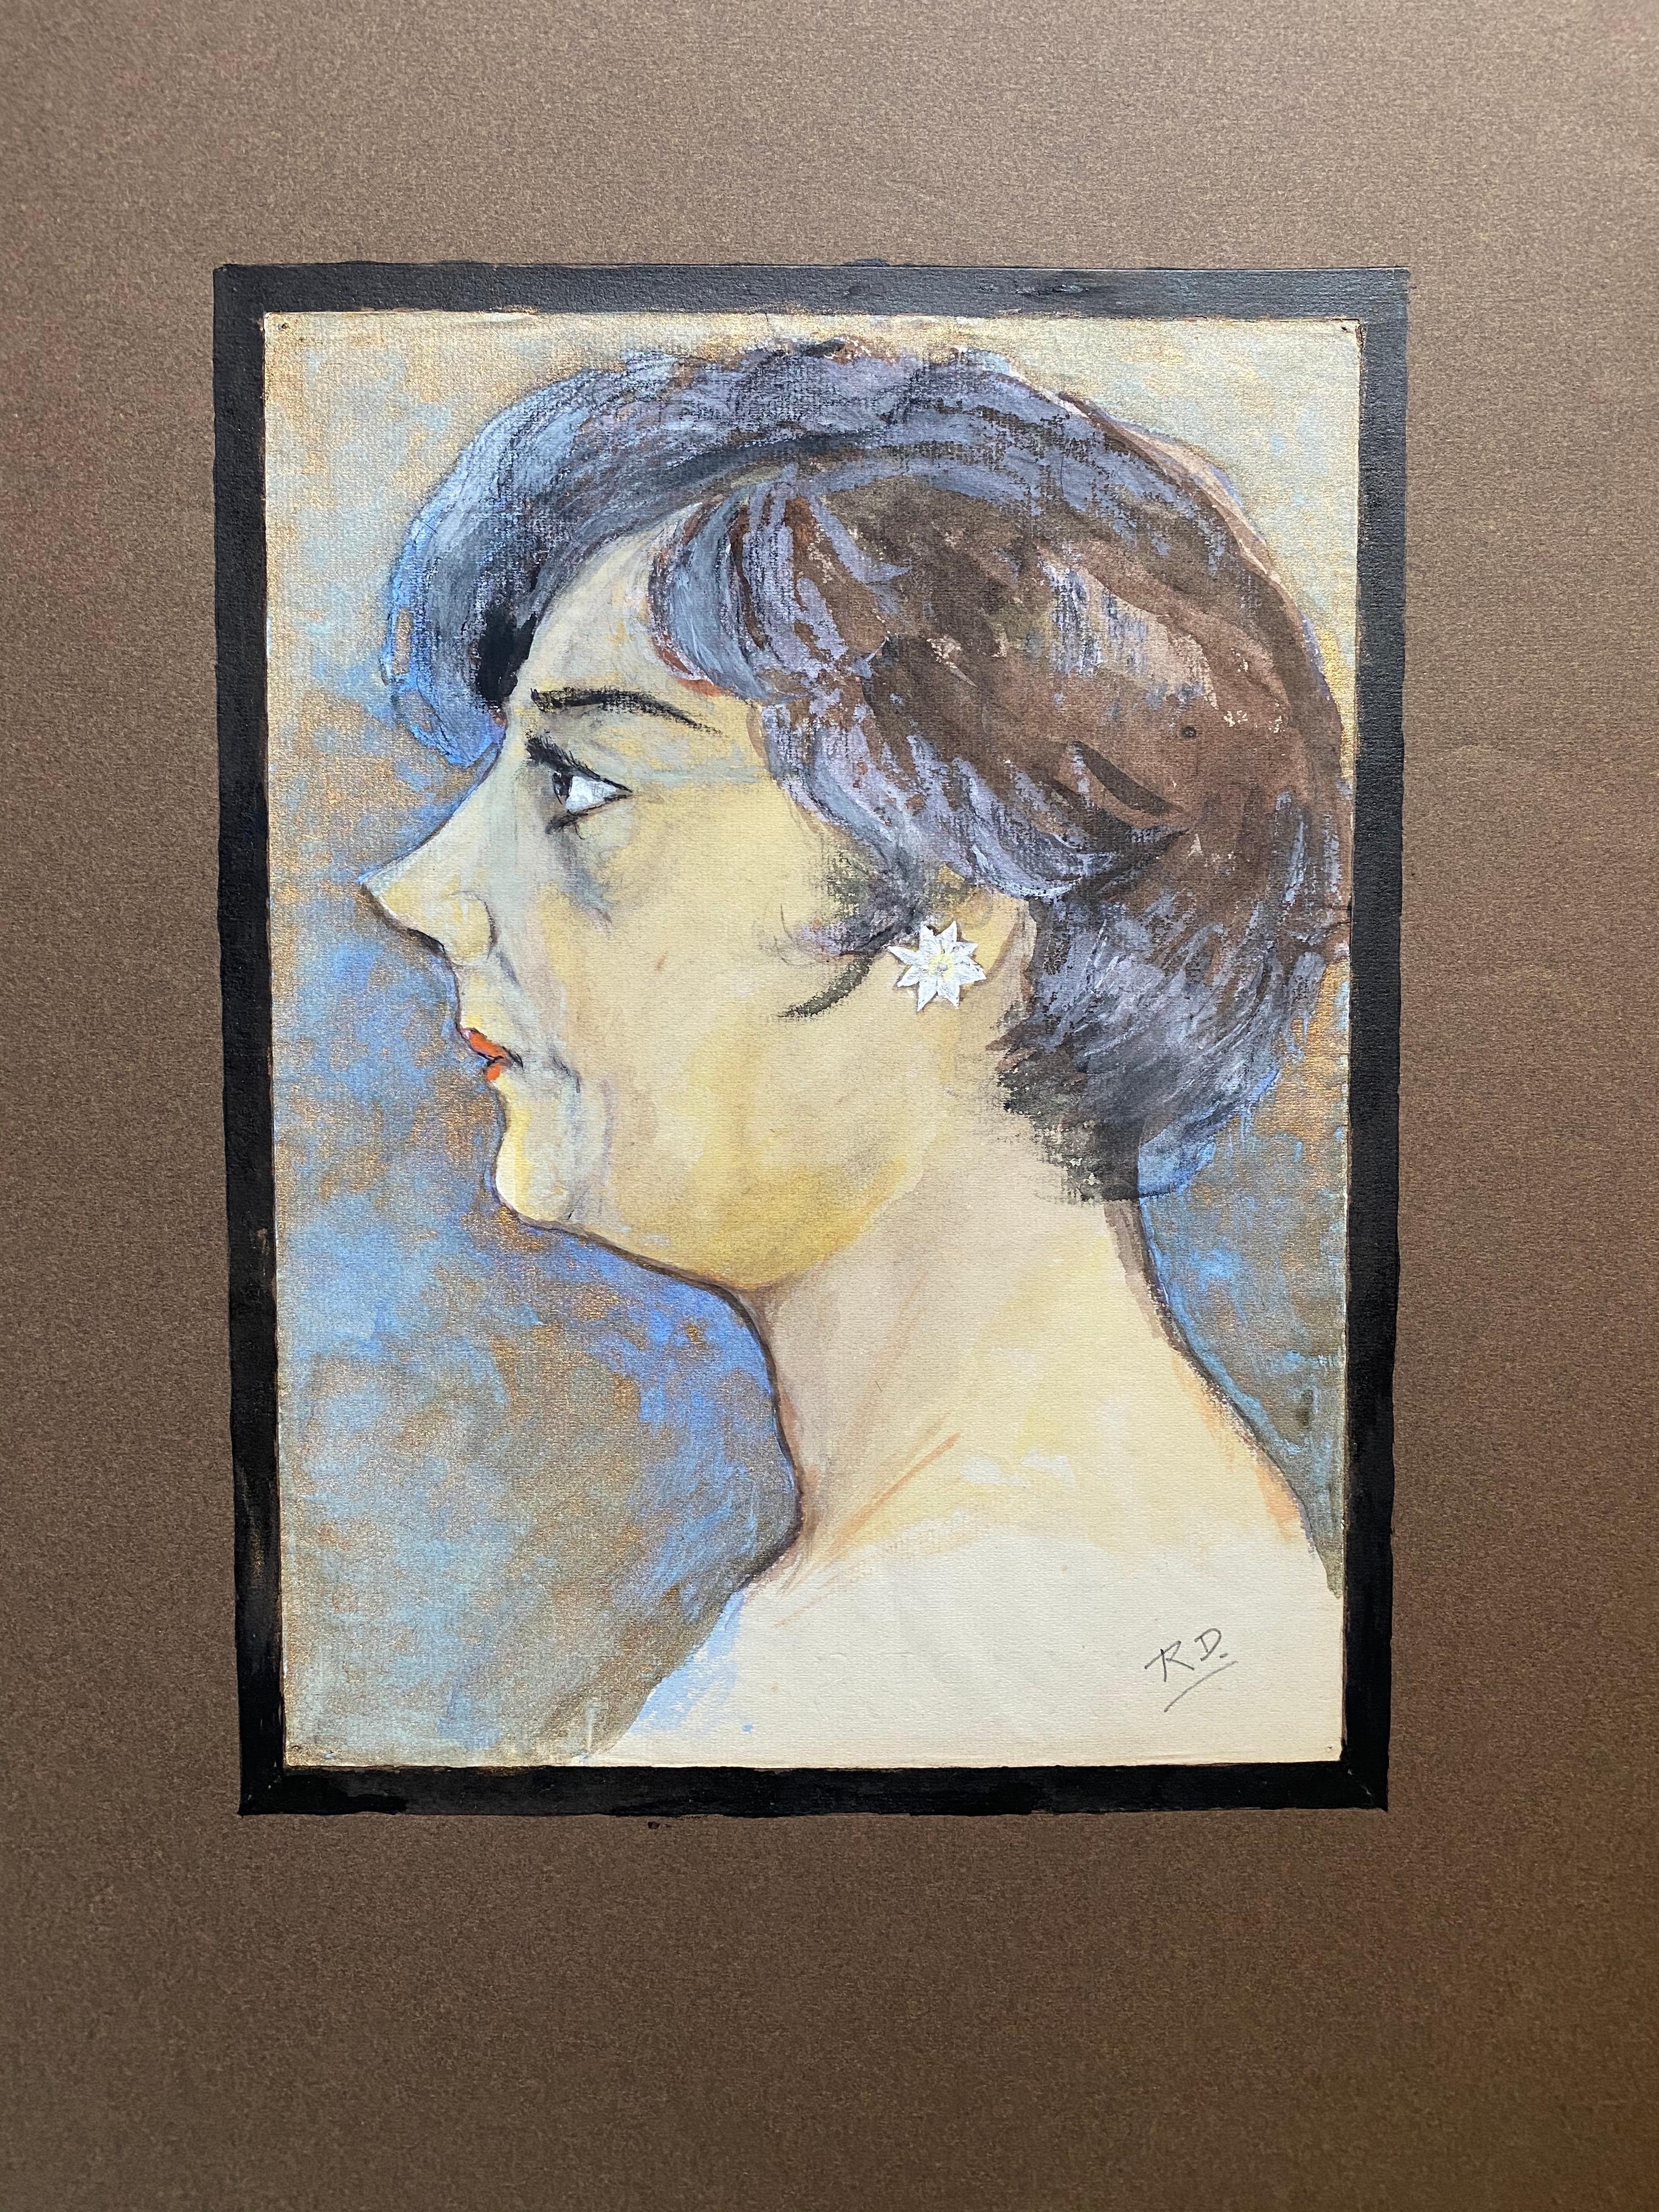 French character portrait
French school, mid 20th century
Gouache paint on unframed paper
stamped to the reverse
Image : 12.75 x 9.5 inches
Overall size: 25 5 x 19.75 inches

Superbly decorative 1960's French portrait painting. Ideal for many